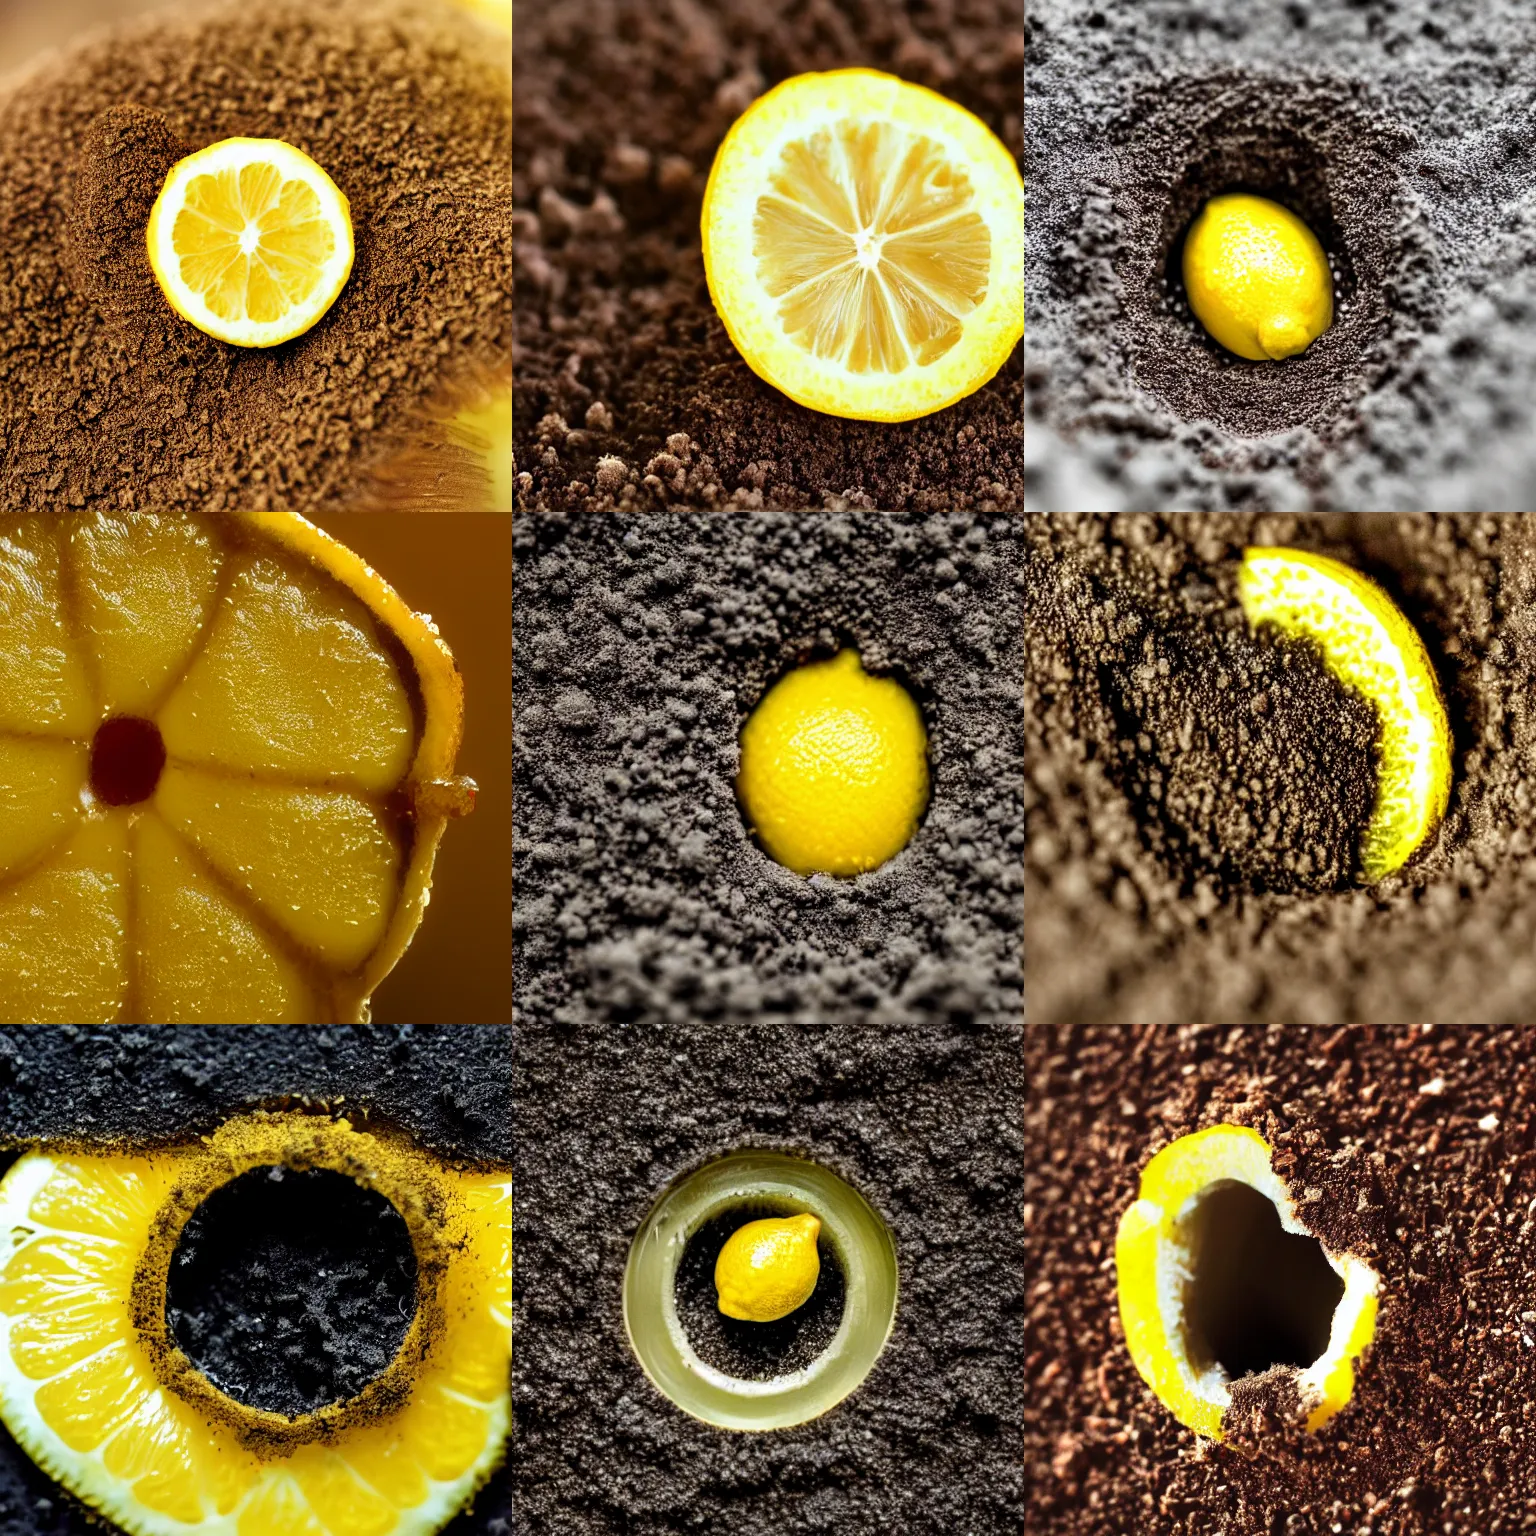 Prompt: a microscopic photo of a pore of a lemon with dirt in it